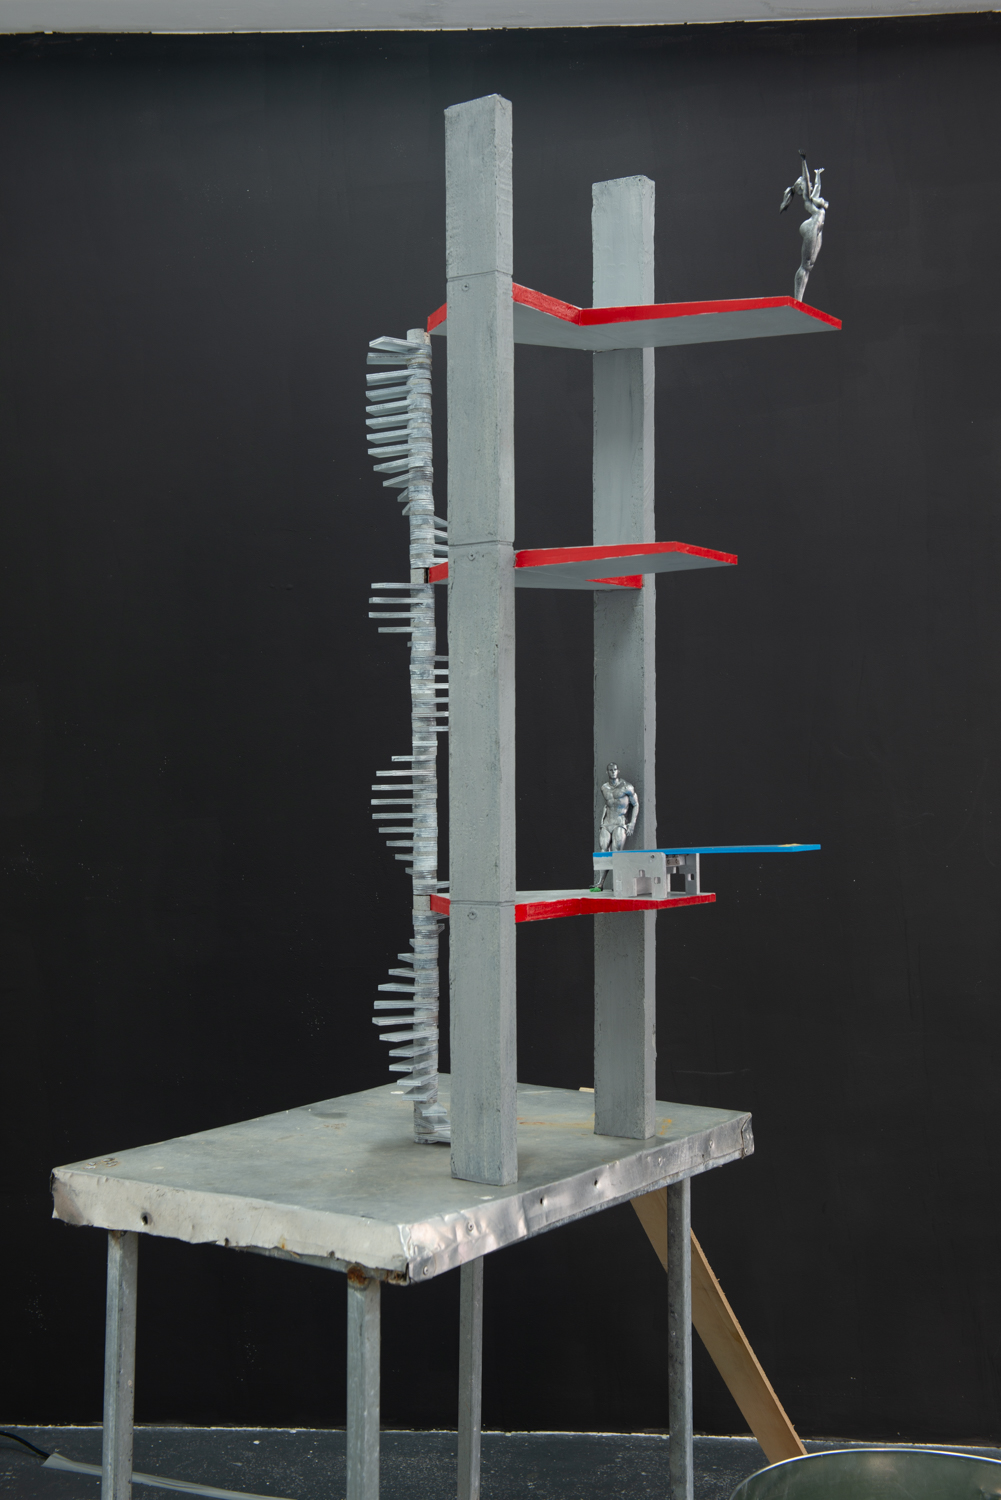 Matthew Ware, <em>Scale model of Harold Holt Diving Board reimagined as a mouse trap so the mice can have one last thrill before they die</em>, 2021, wood, plastic, resin, glue, aluminium, paint. Photo: Nicholas James Archer